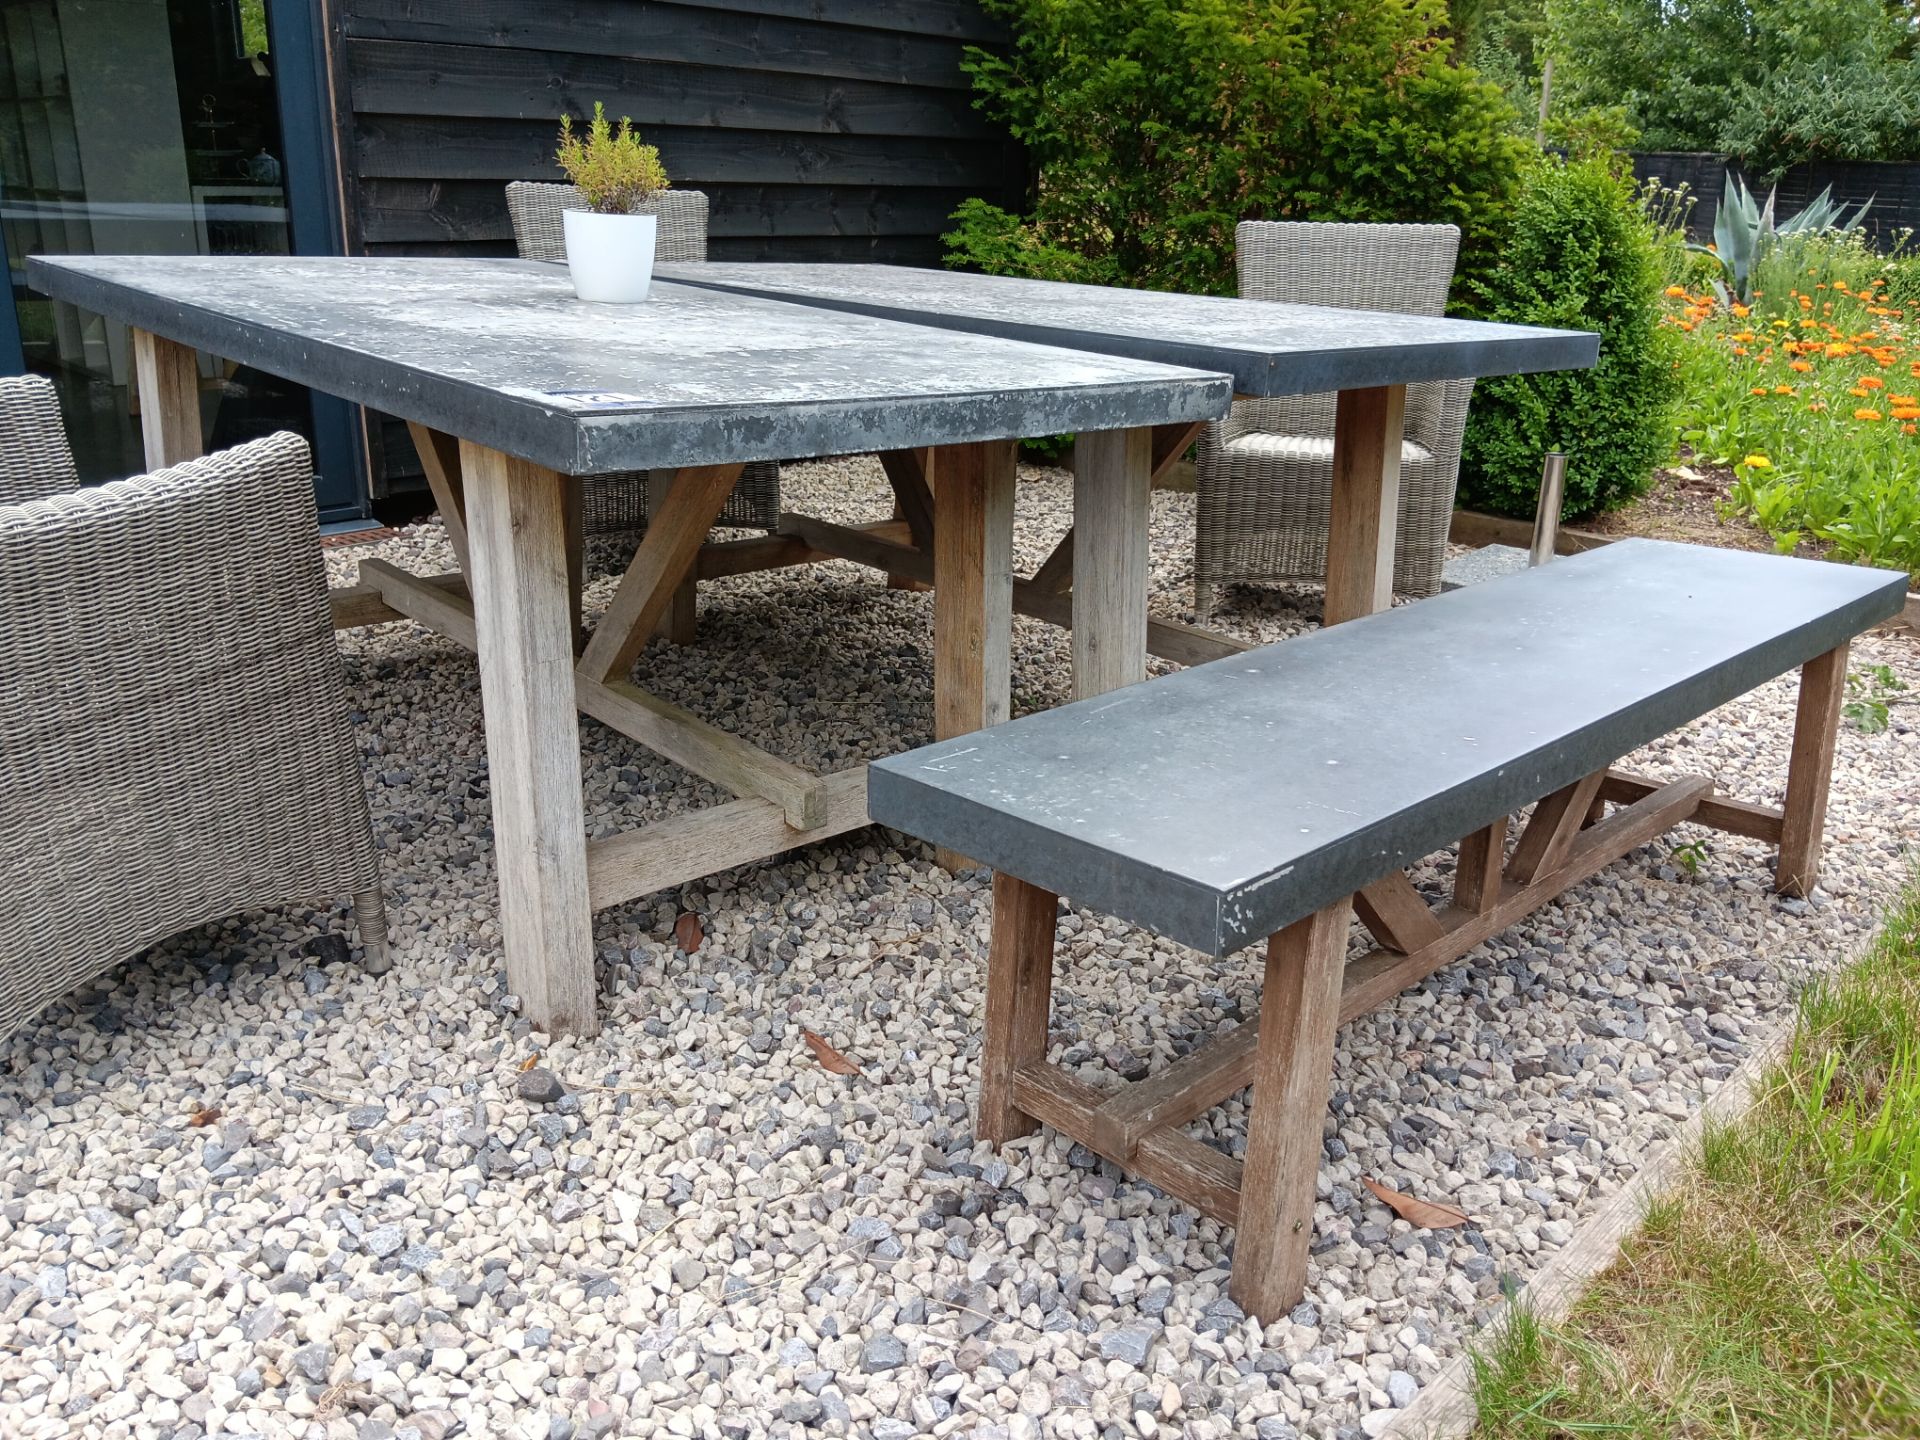 2x galvanised steel effect tables with 1 bench and 4x wicker effect chairs approx. 180cm x 90cm – - Image 2 of 3